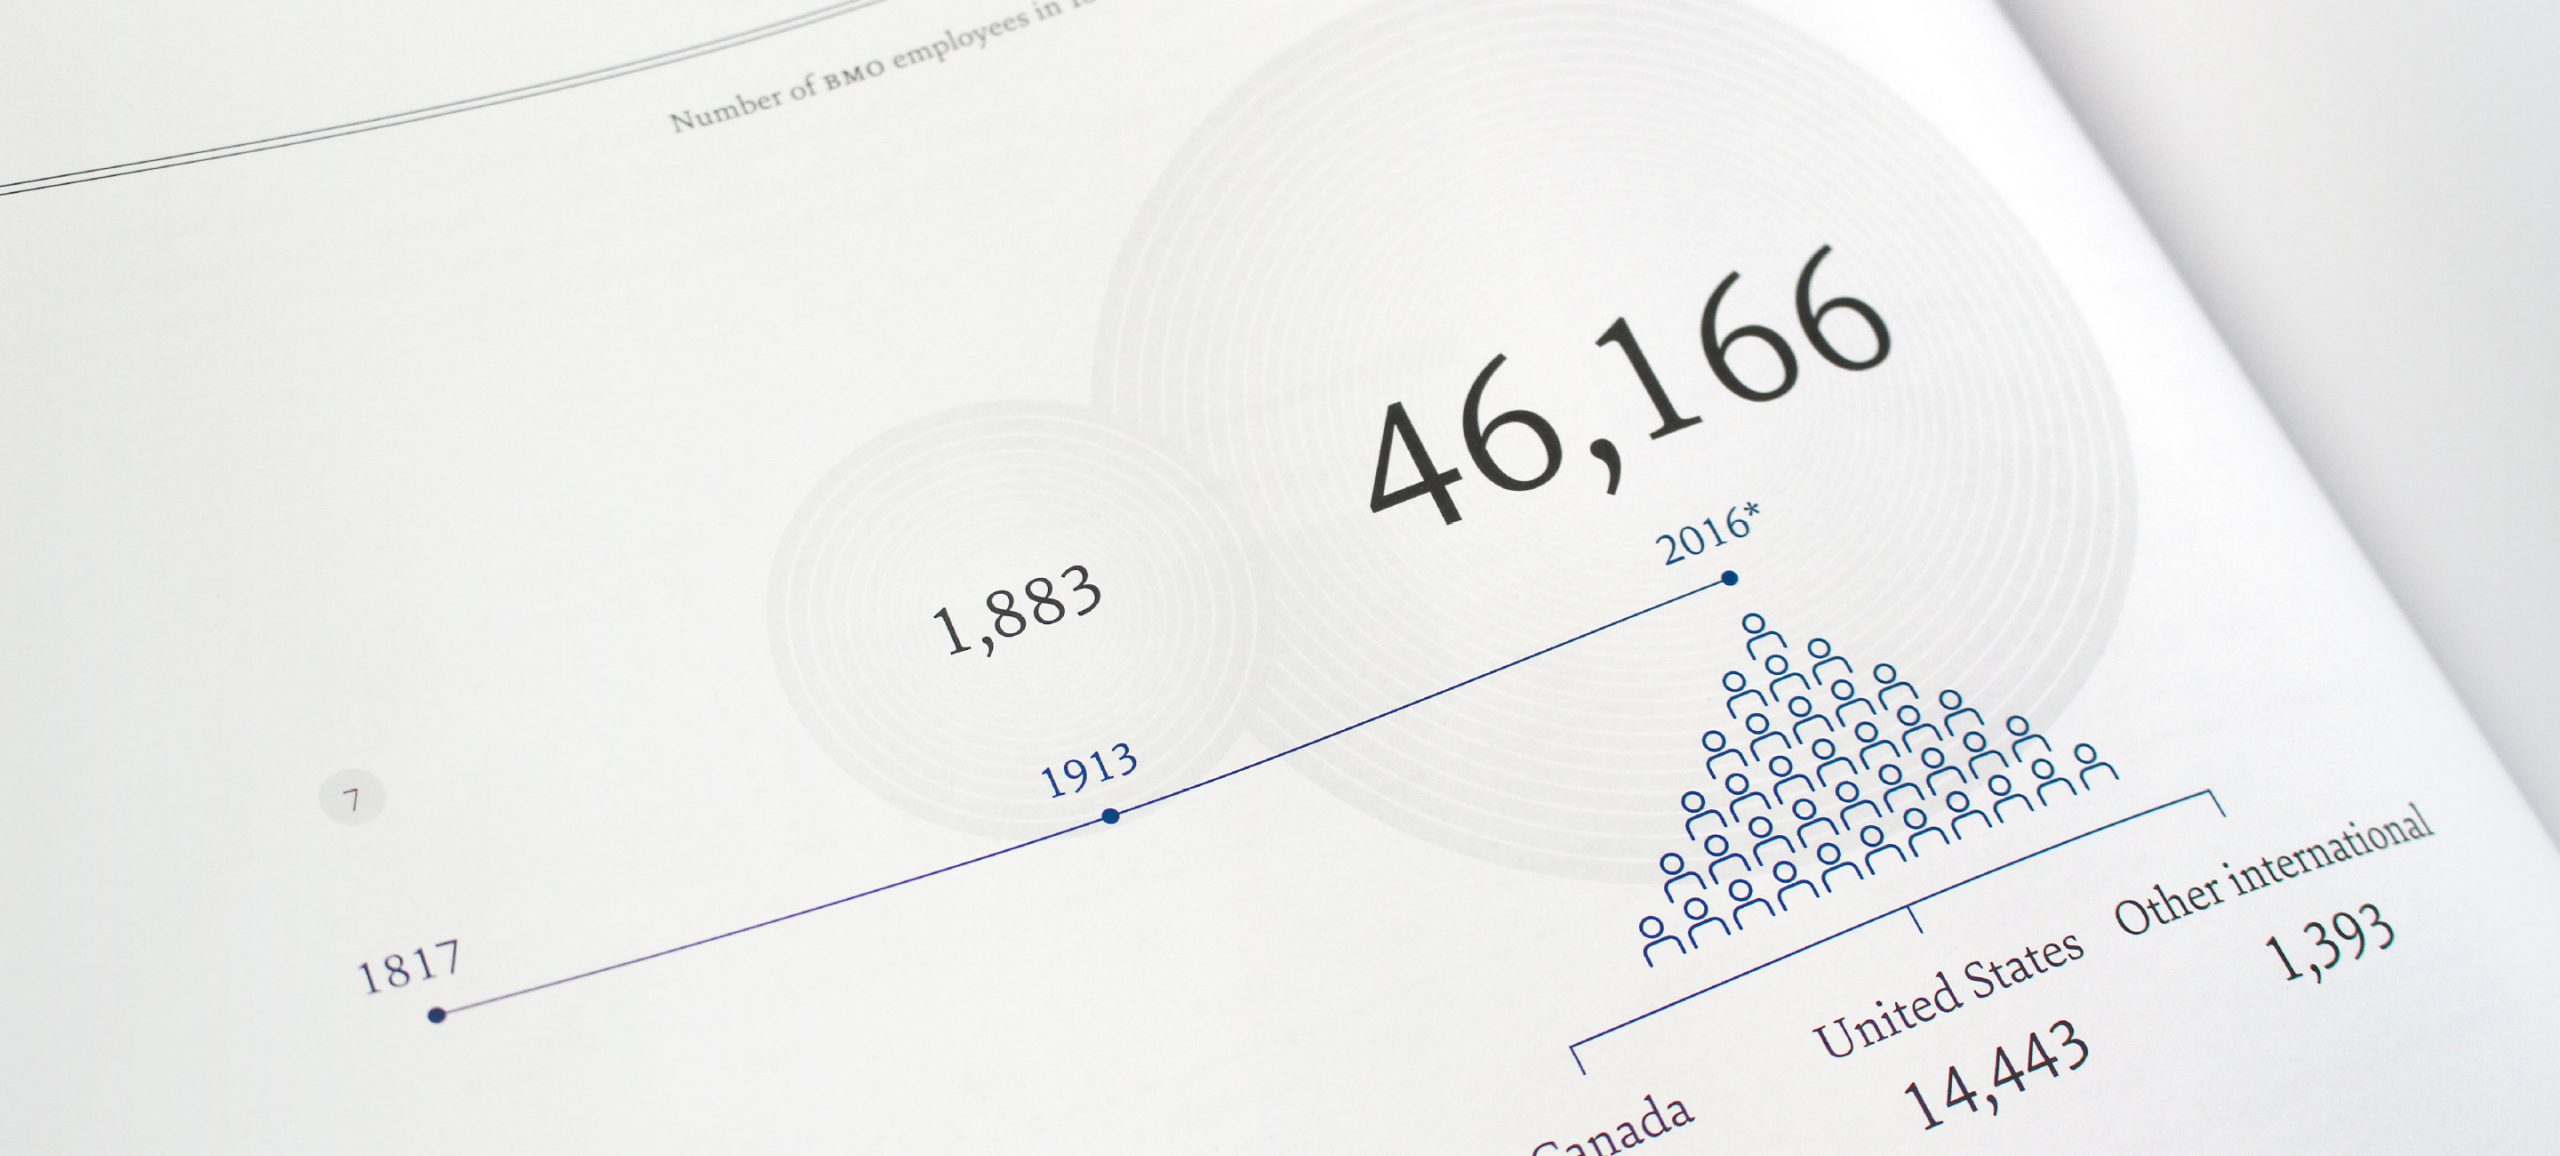 A close-up detail of a data visualization from the book is featured.